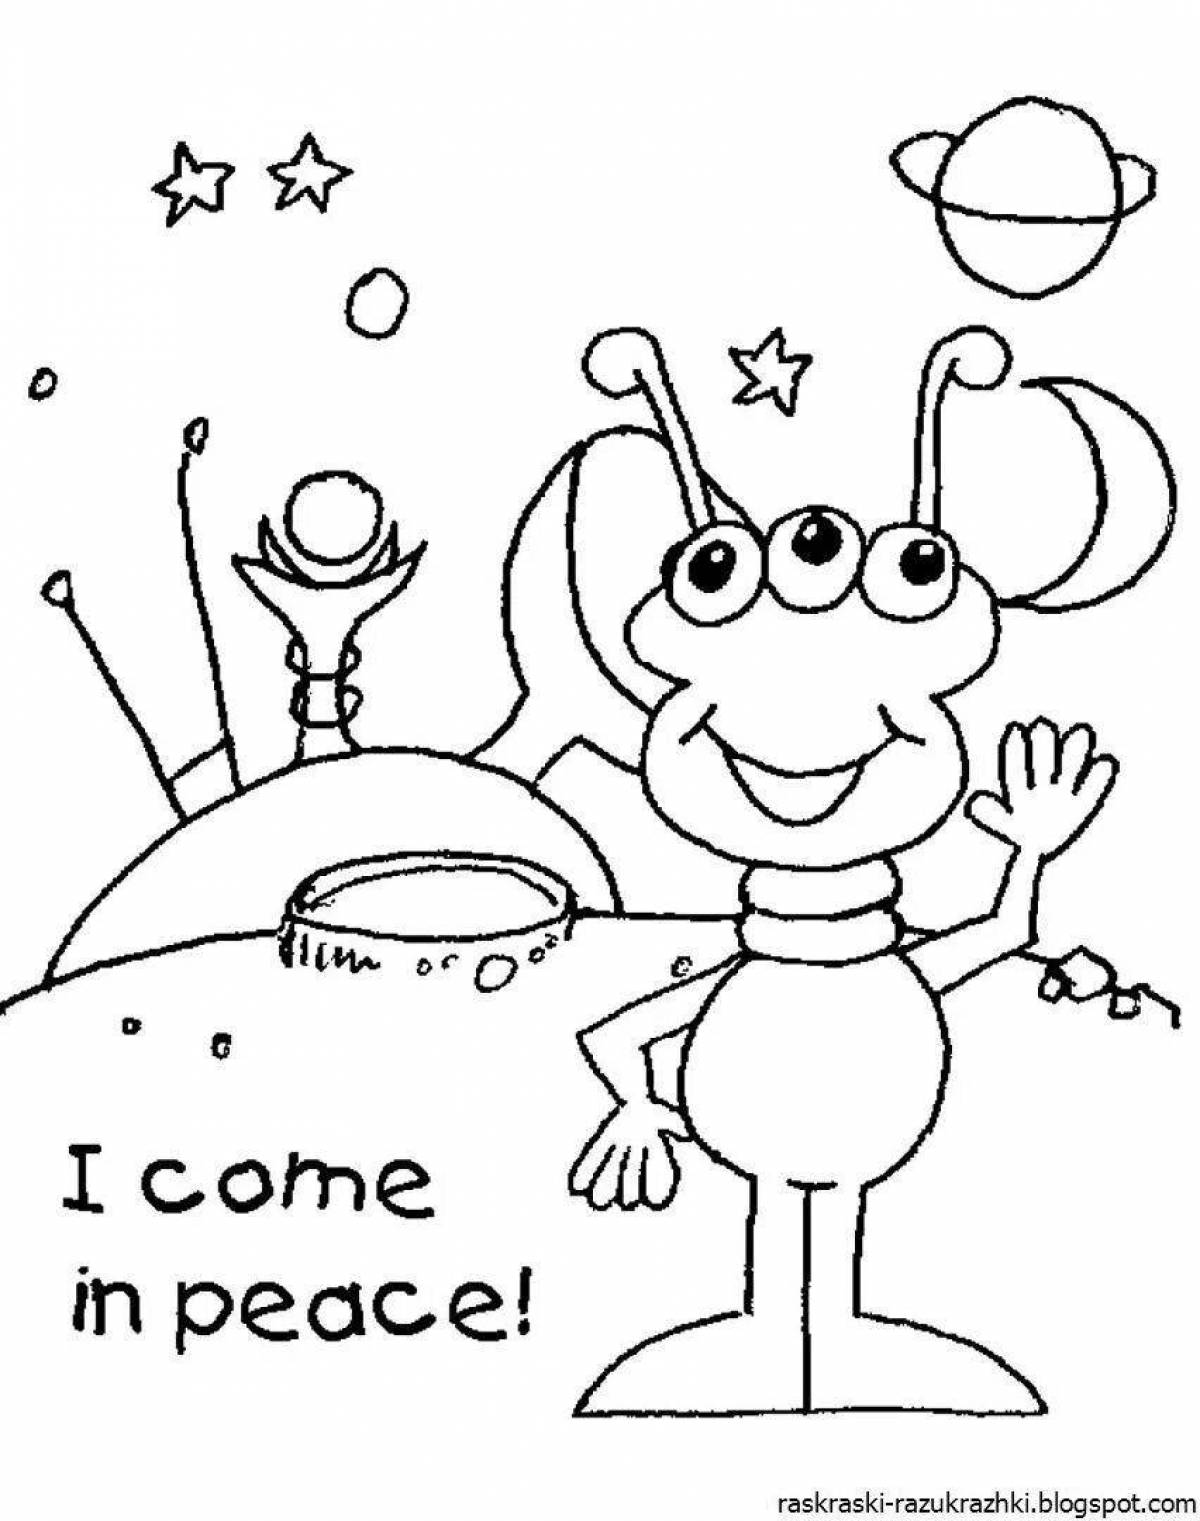 Color-explosion aliens coloring page for children